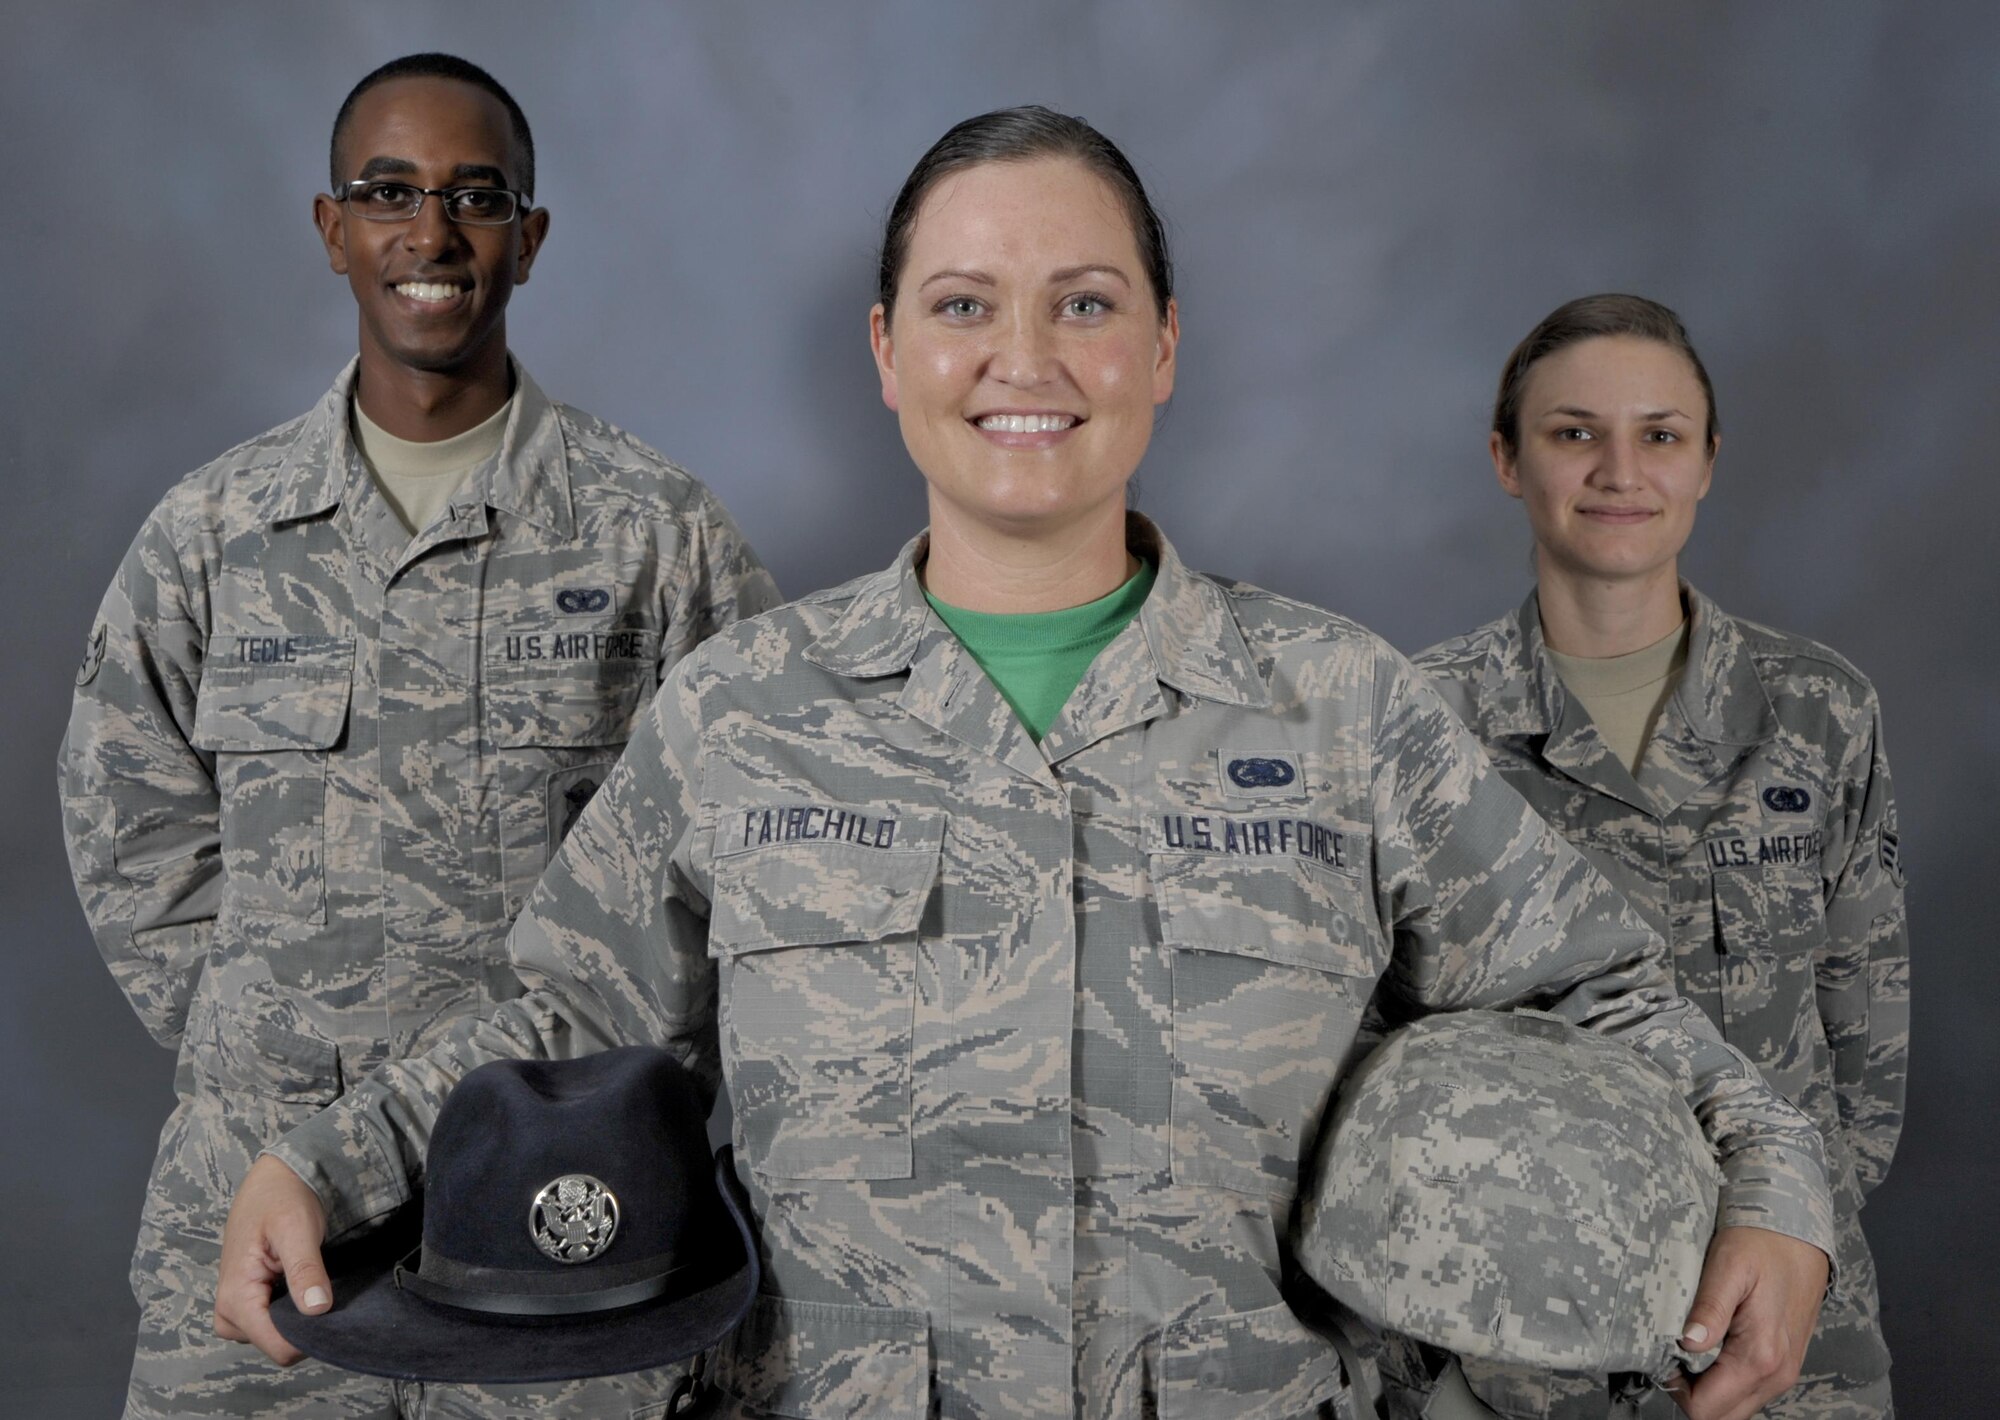 Staff Sgt. Jessica Fairchild, center, a former military training instructor and currently an individual protective equipment supervisor assigned to the 6th Logistics Readiness Squadron, pauses for a photo with Airman 1st Class Zenawi Tecle, left, a former trainee of Fairchild and now an entry controller with the 6th Security Forces Squadron, and Senior Airman Kristin Weiland, right, an individual protective equipment technician with the 6th LRS, Feb. 24, 2017, at MacDill Air Force Base, Fla. Fairchild served four years as an MTI applying professionalism and dedication to train thousands of people and groomed them into Airmen before returning to her current career field. (U.S. Air Force photo by Airman 1st Class Mariette Adams)